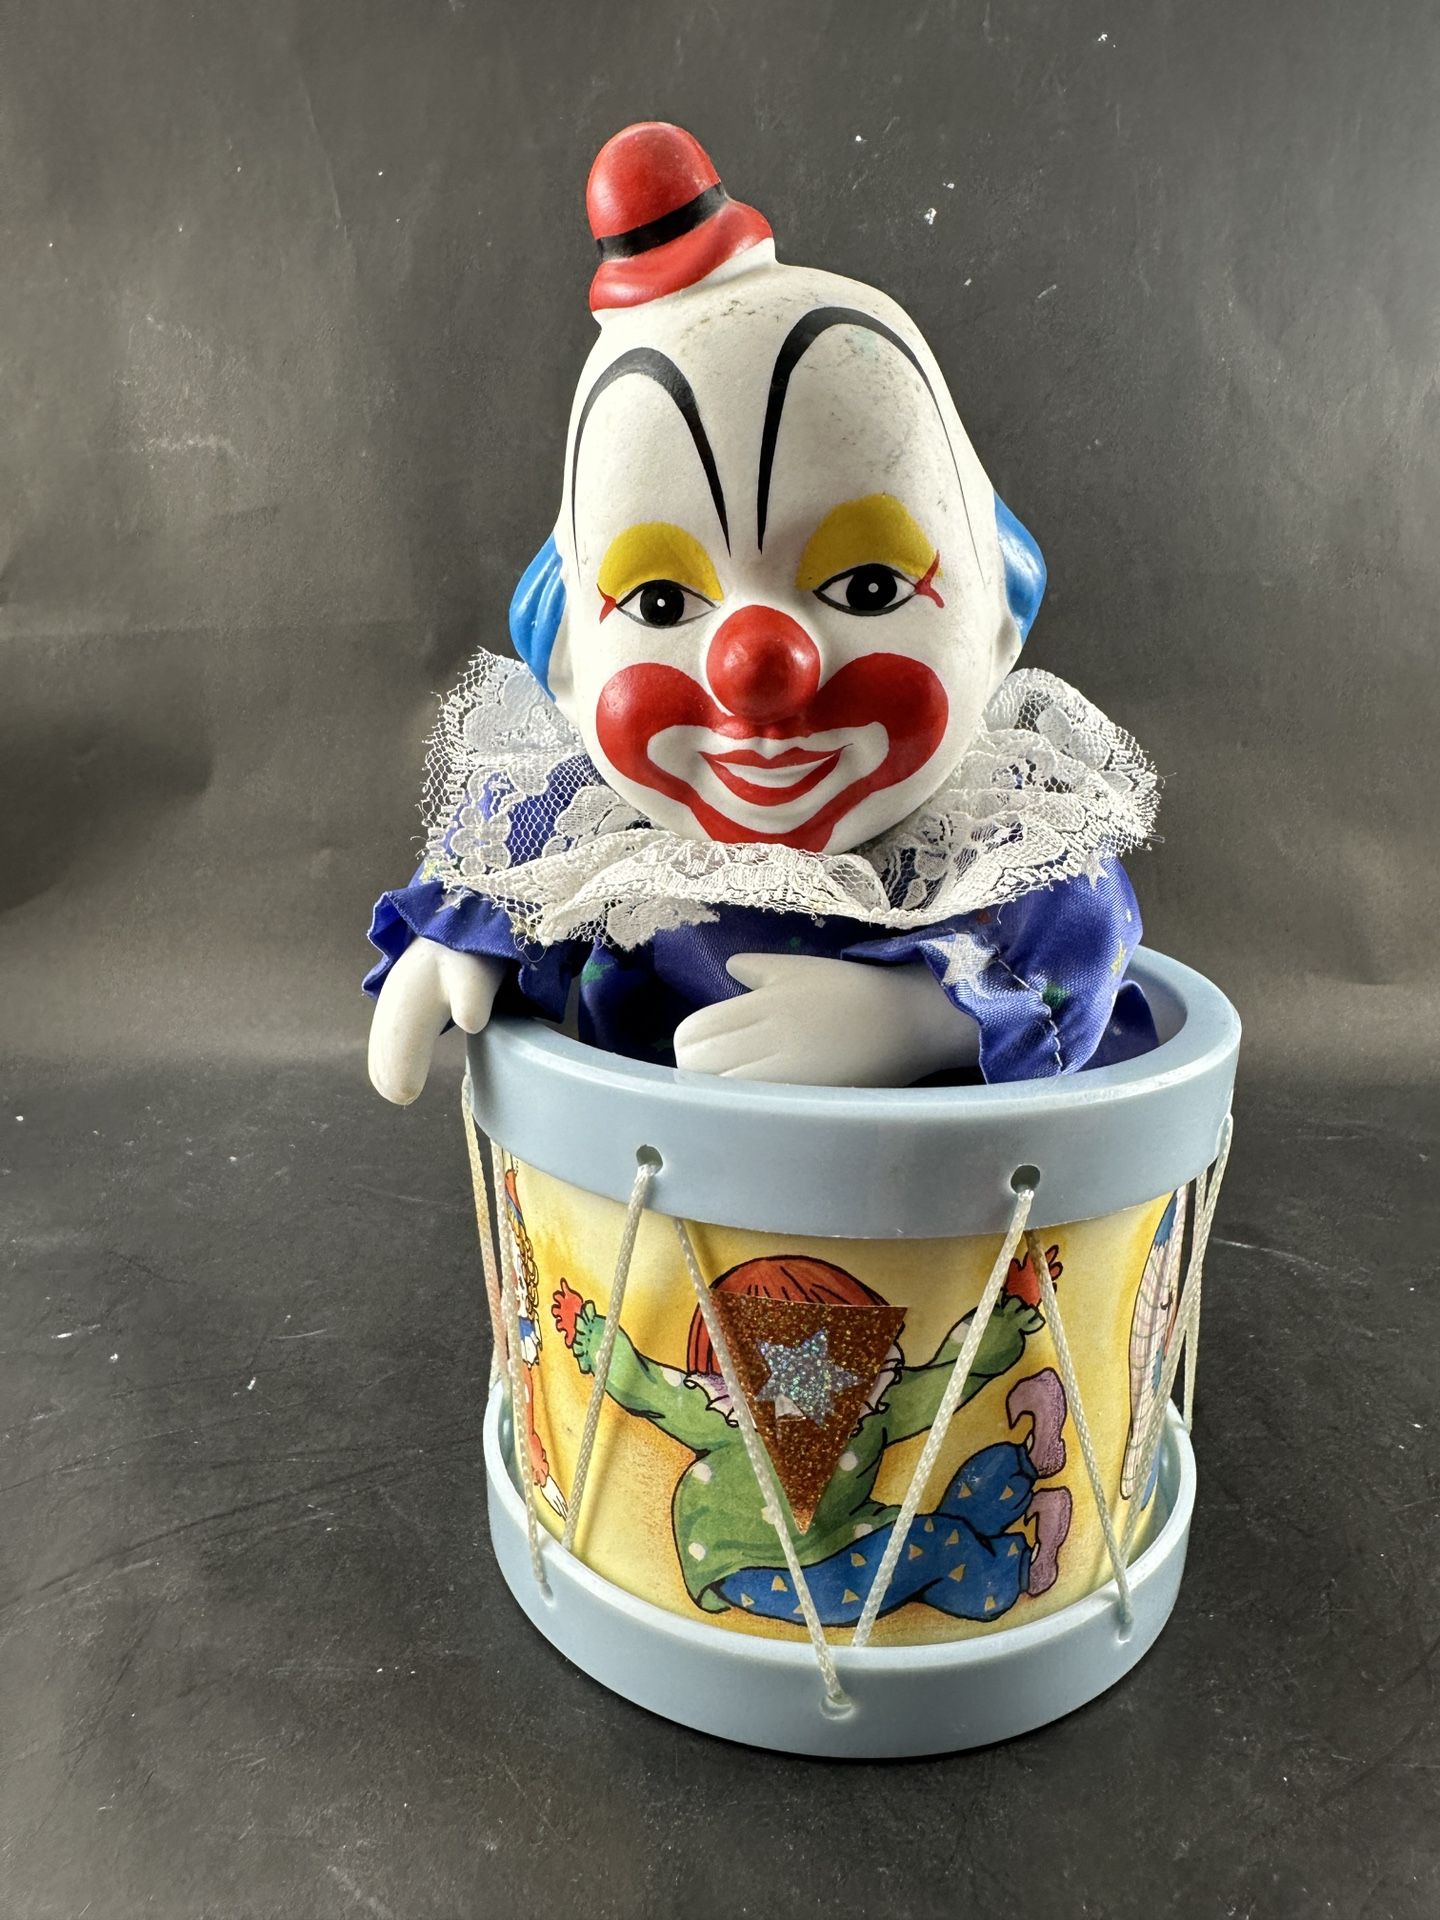 Vintage Clown in Drum Wind Up Animated Music Box-Plays “Send In The Clowns” 🤡 WORKS!